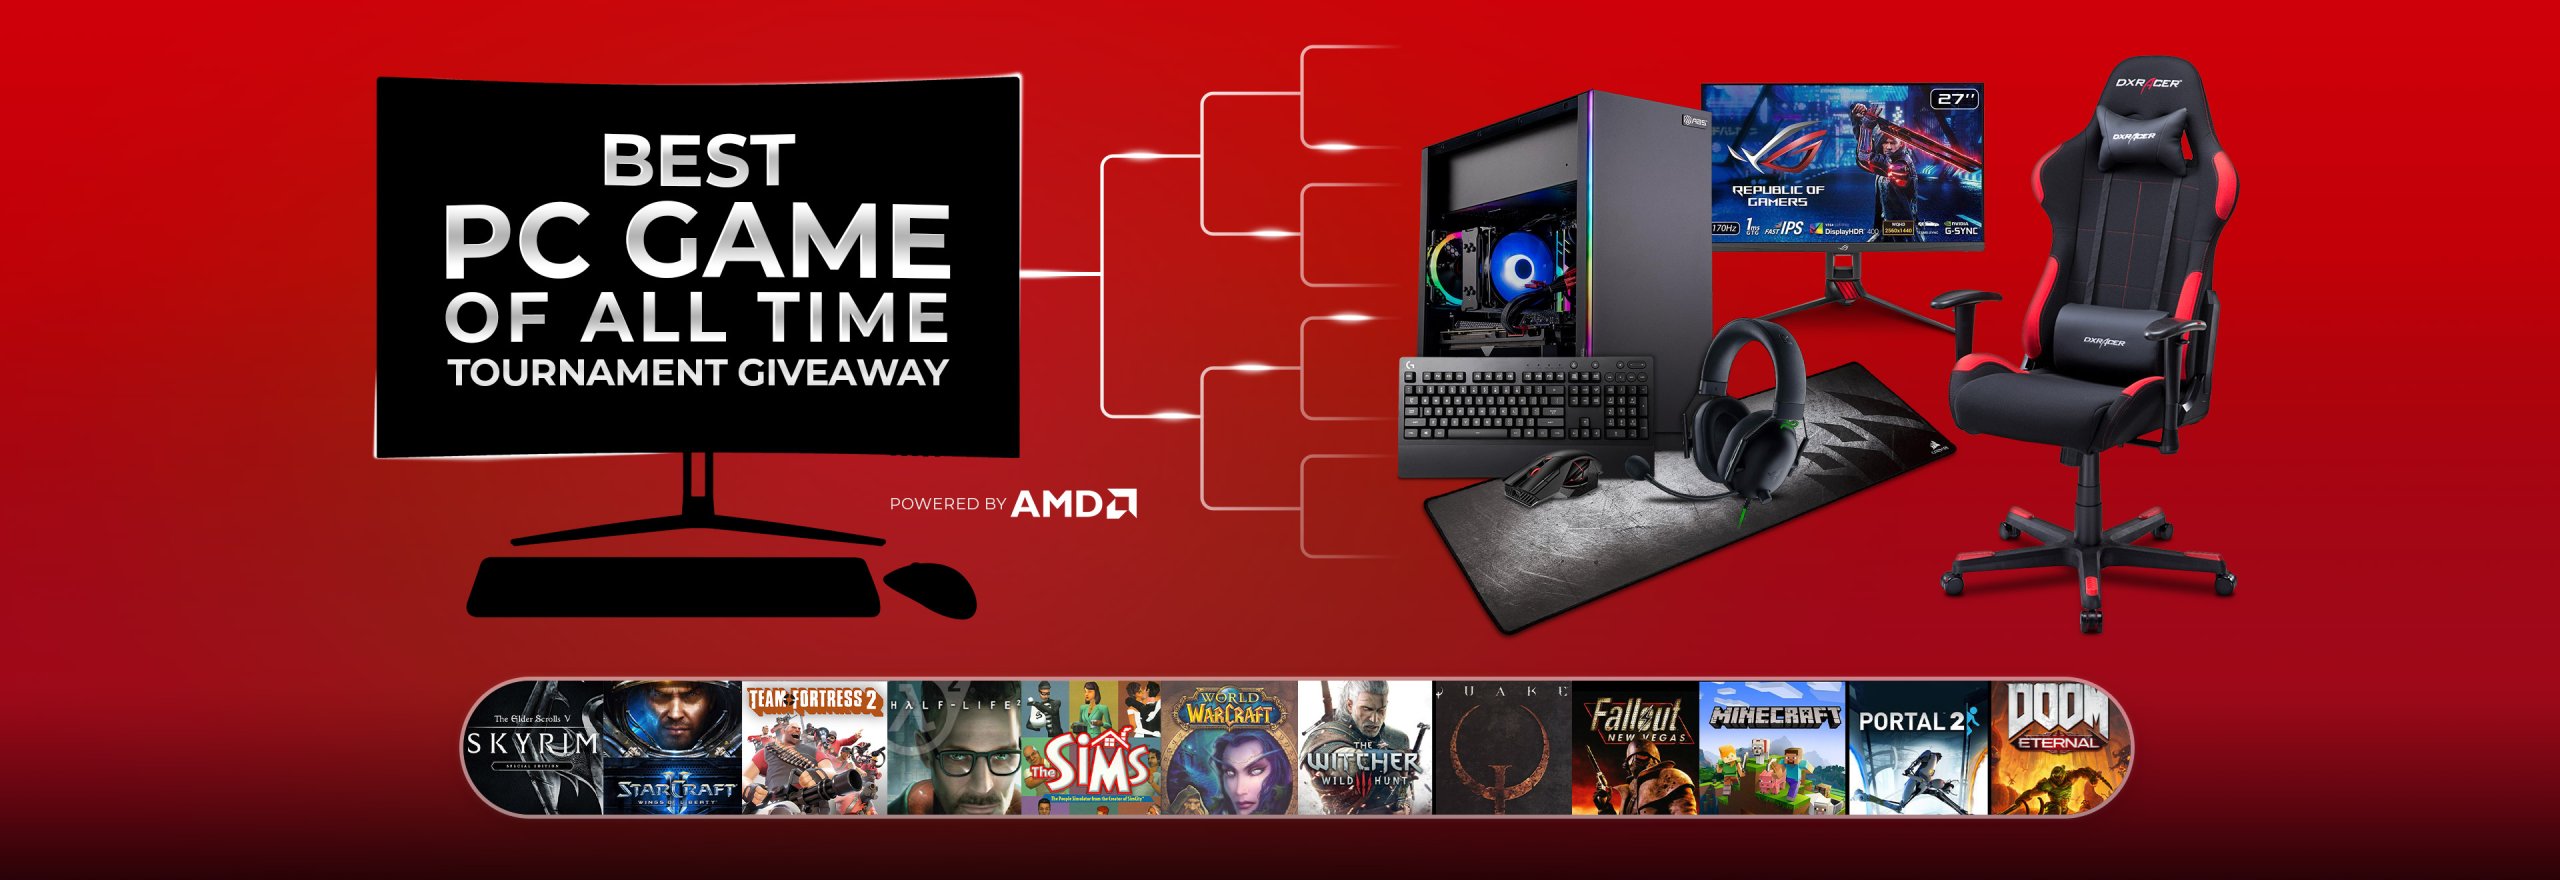 BEST PC GAME OF ALL TIME TOURNAMENT GIVEAWAY - Newegg Insider